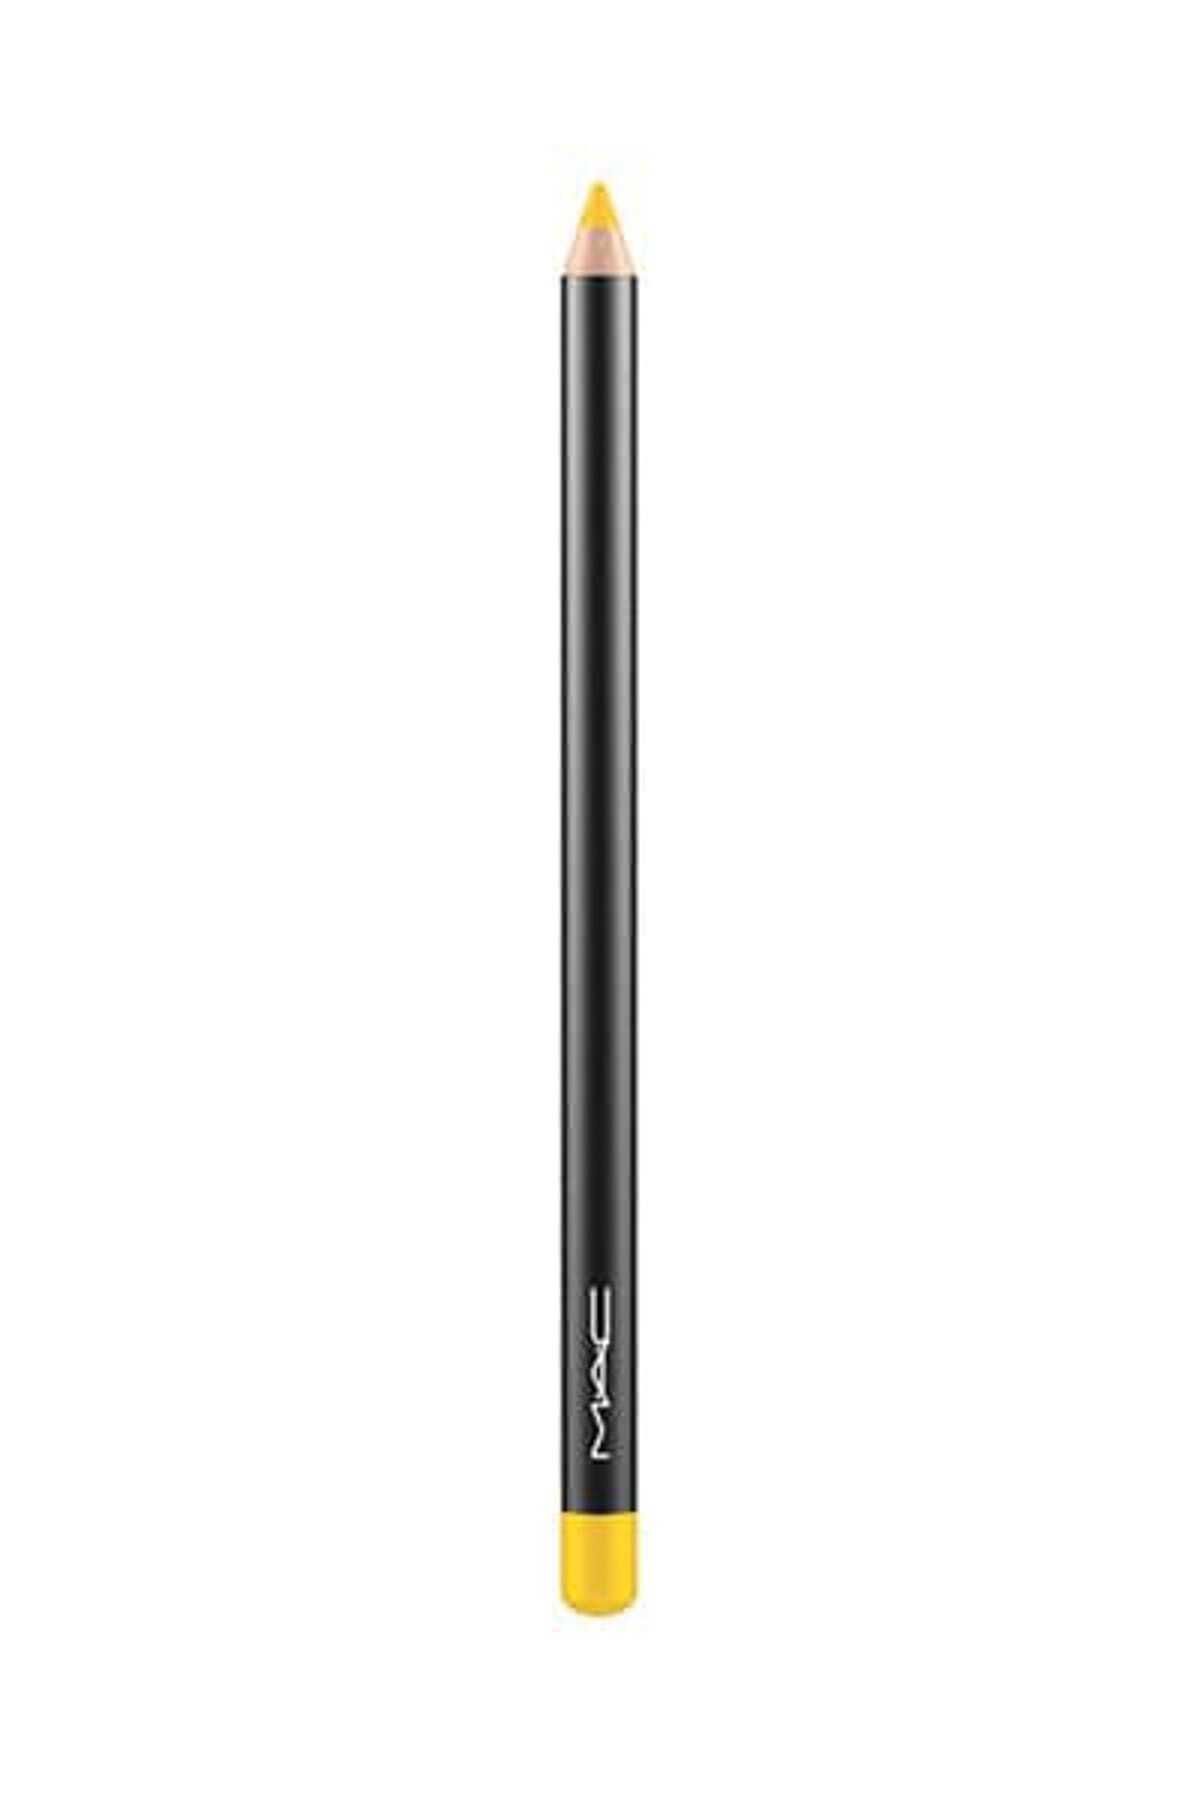 Mac MULTİ-PURPOSE PEN PRODUCT-CHROMAGRAPHİC PENCİL PRİMARY YELLOW 1.36 G PSSN247